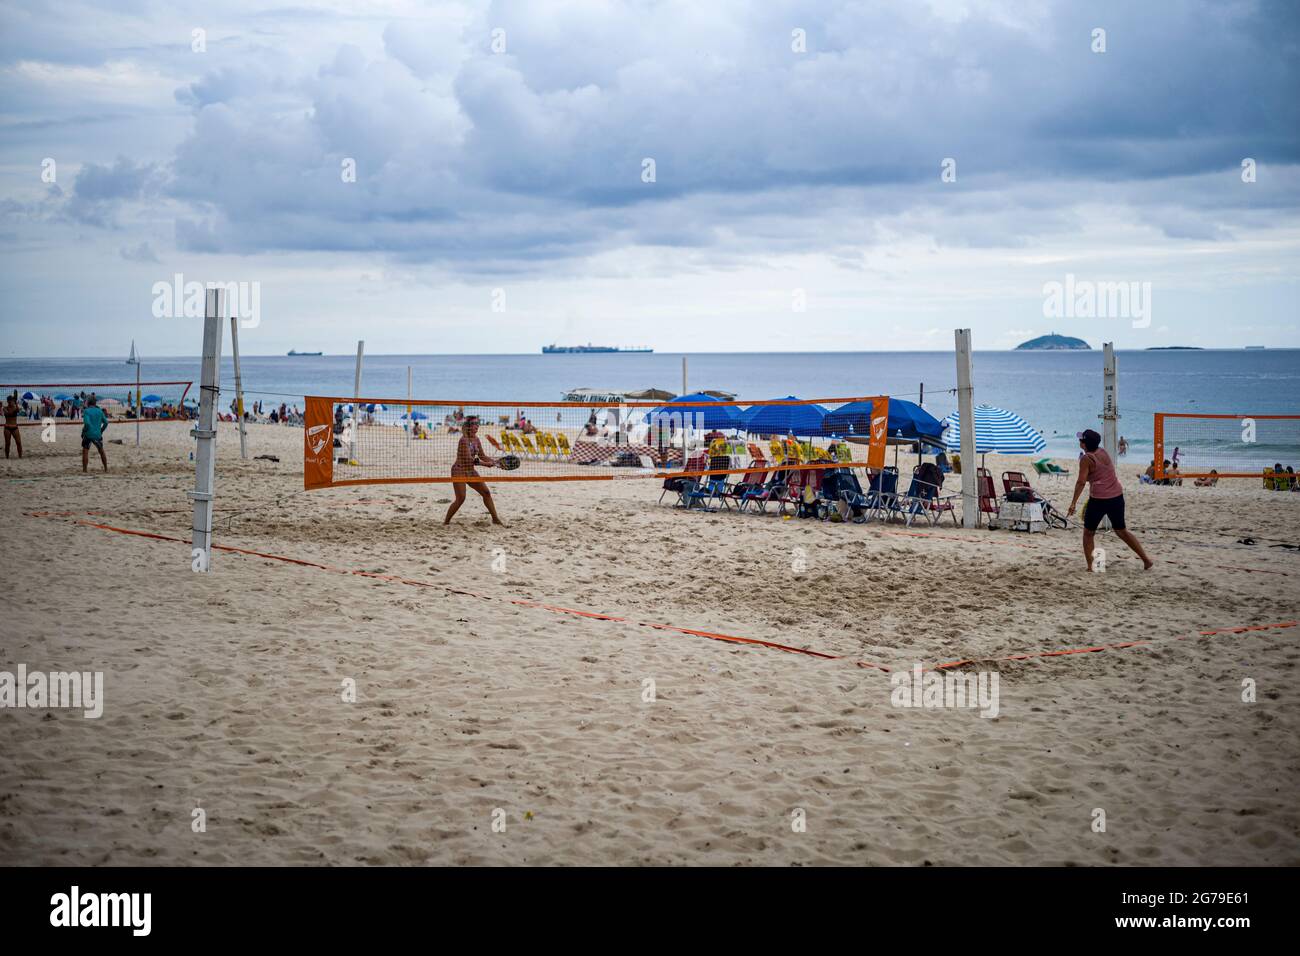 23,931 Brazil Beach Volleyball Stock Photos, High-Res Pictures